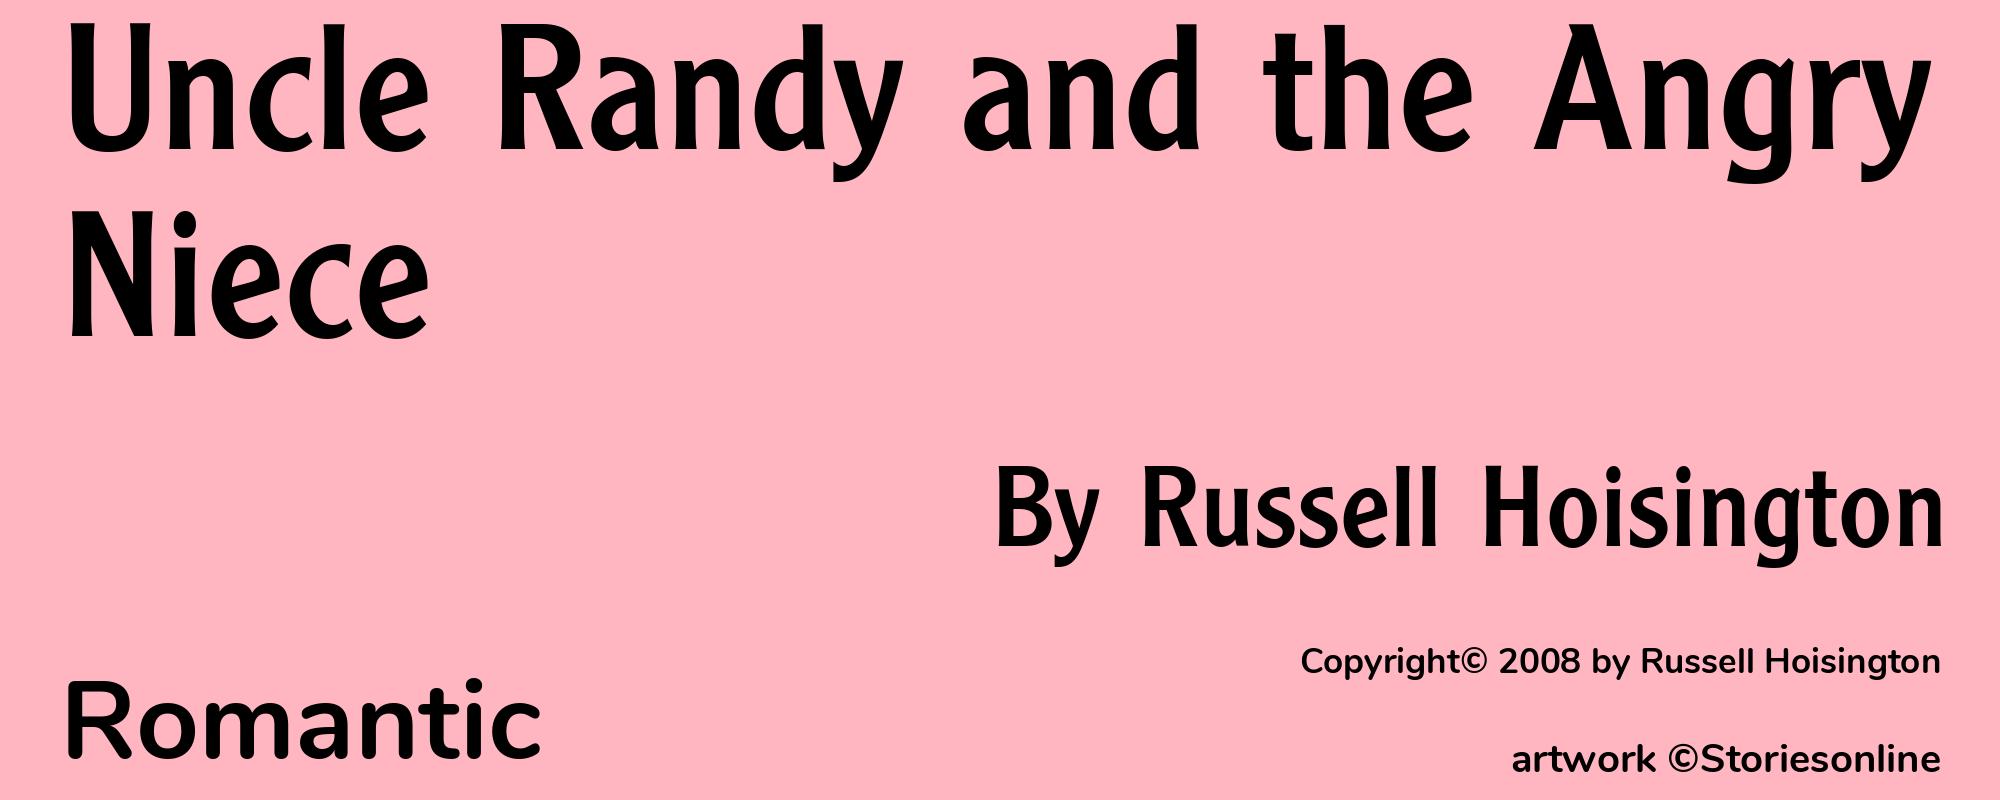 Uncle Randy and the Angry Niece - Cover